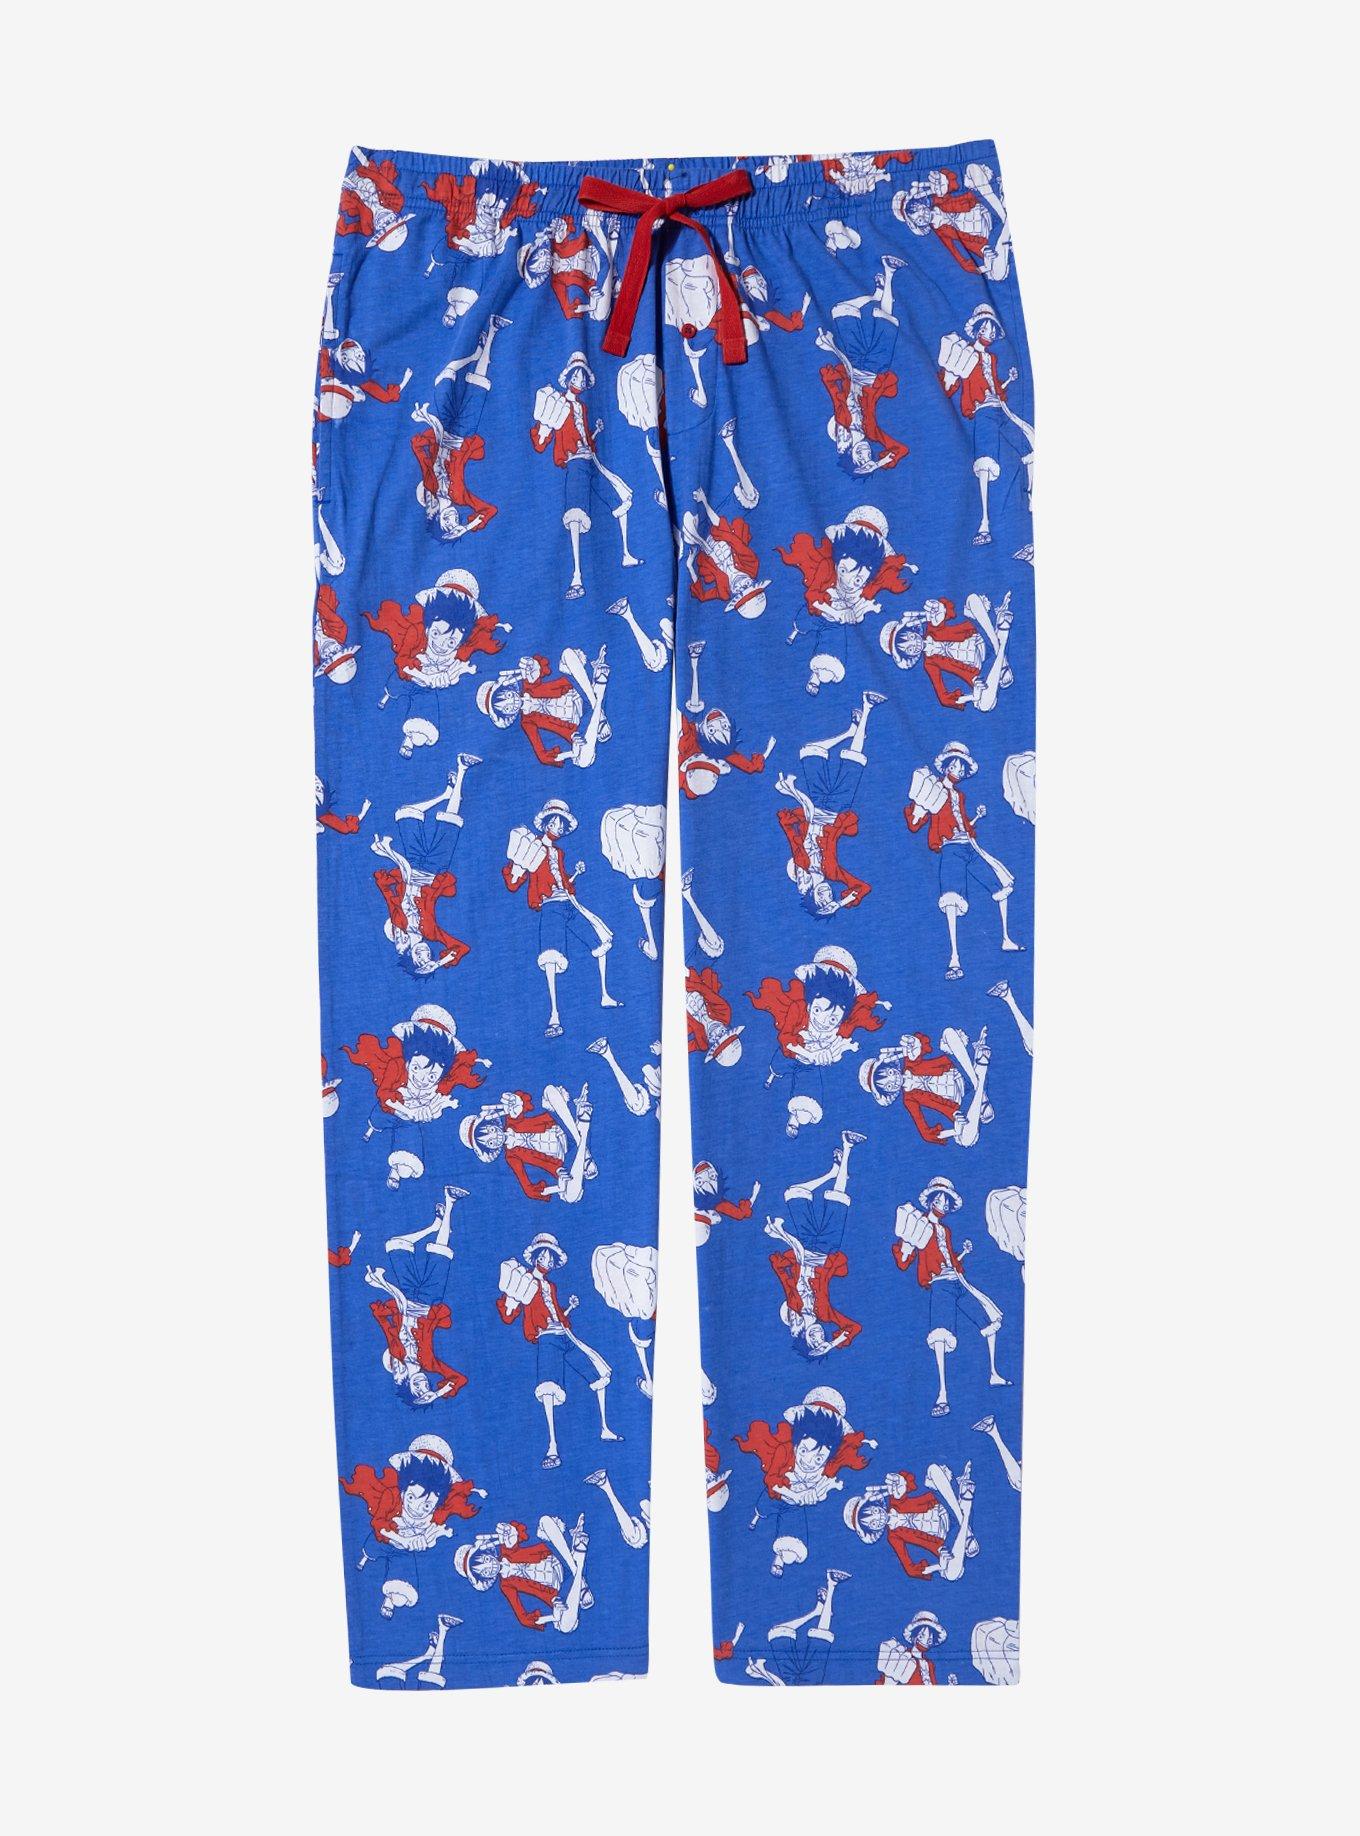 Peanuts Snoopy Men's and Big Men's Graphic Sleep Pants, Size S-2X 